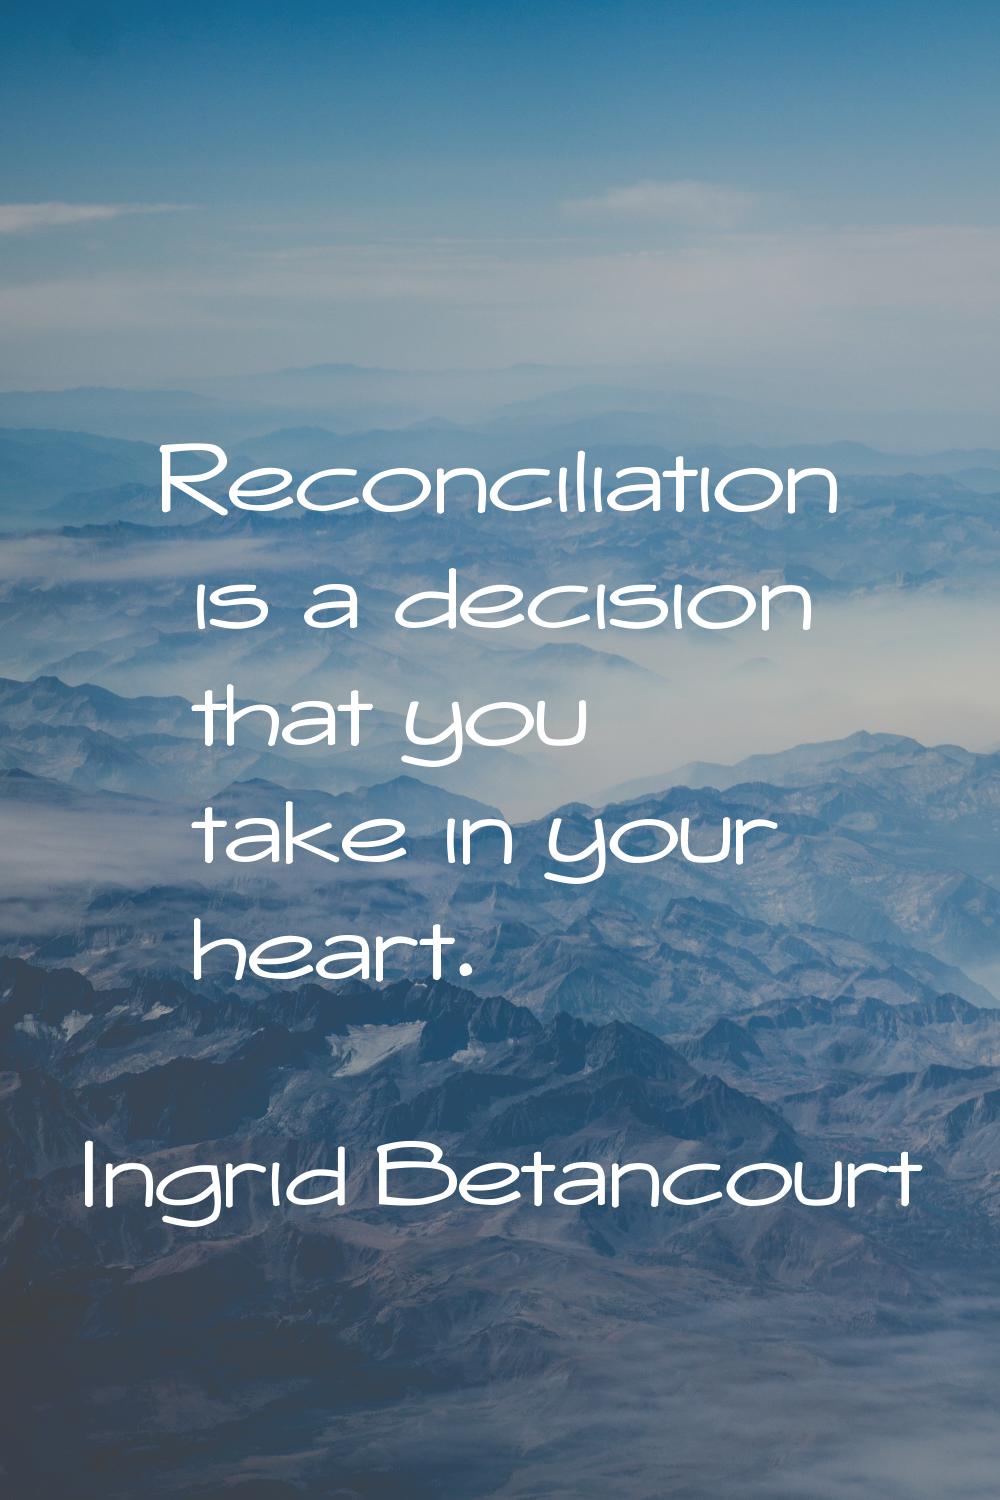 Reconciliation is a decision that you take in your heart.